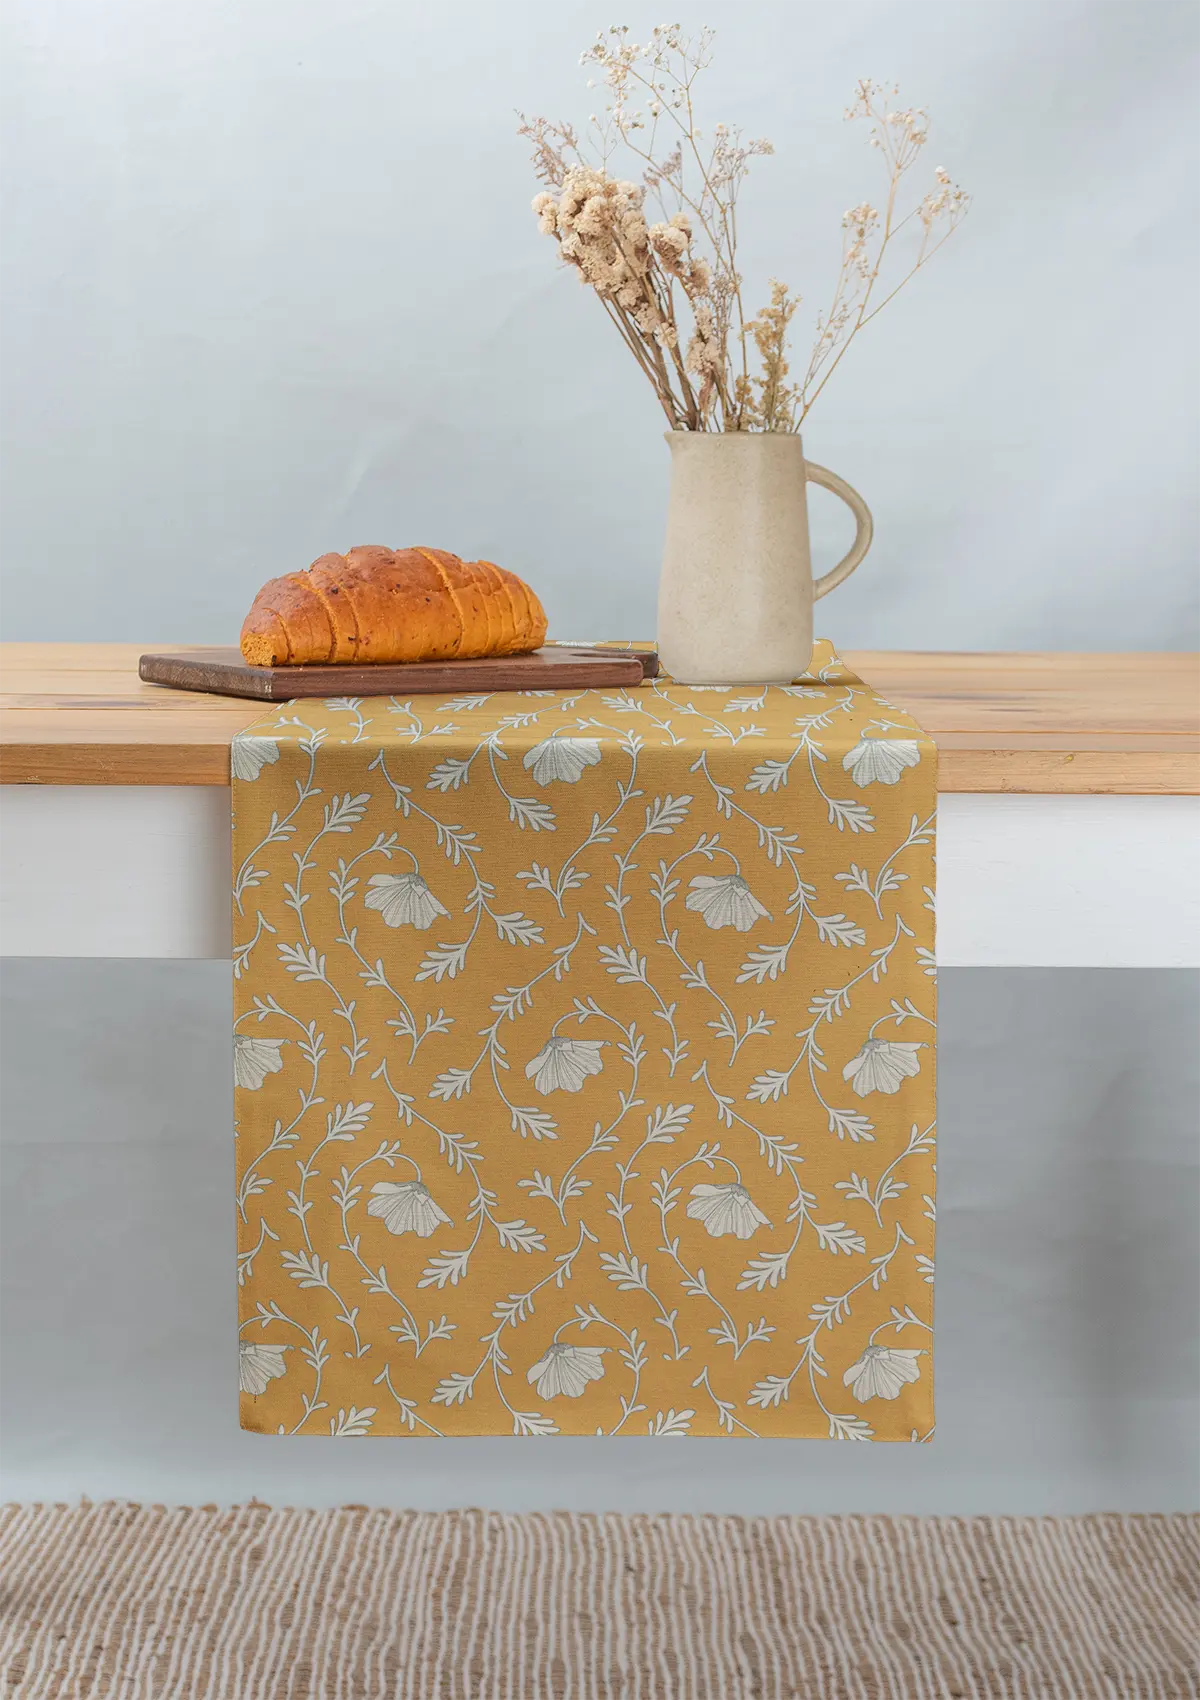 Eden 100% cotton customisable floral table Runner for dining - Mustard